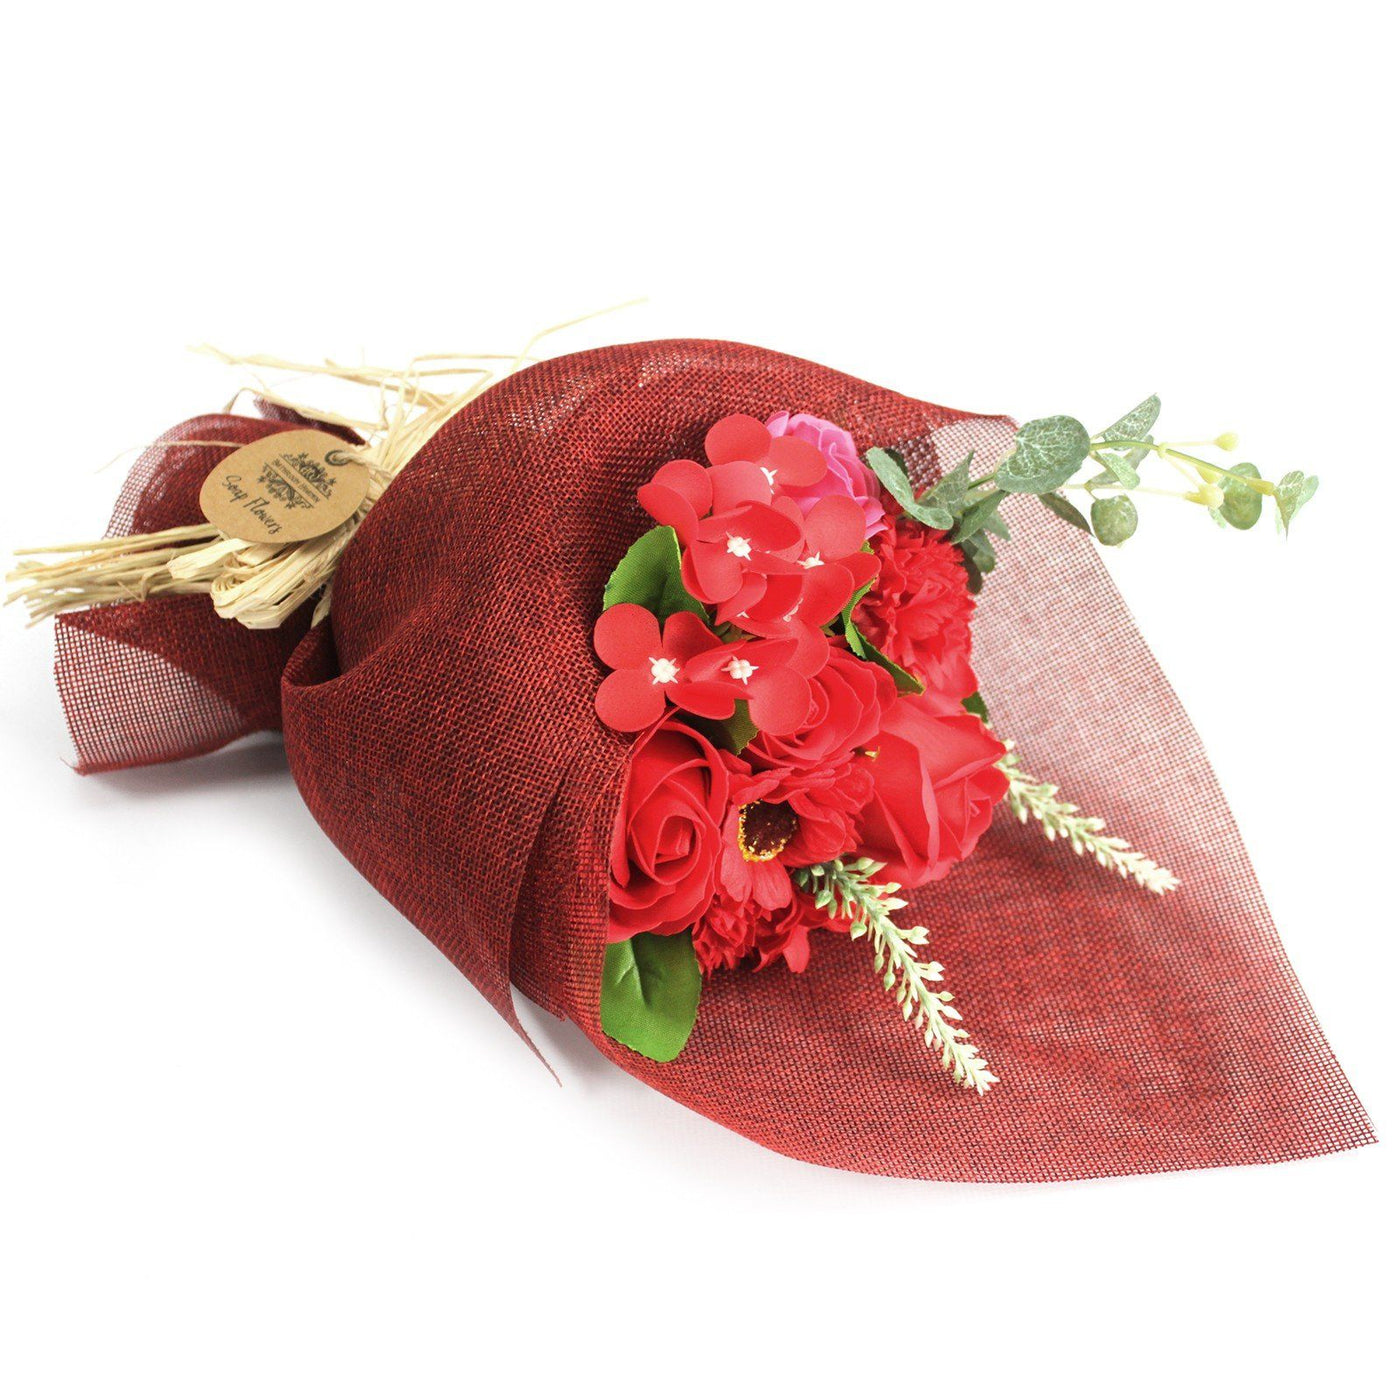 Luxury Standing Red Body Soap Flower Bouquet Gift Set.